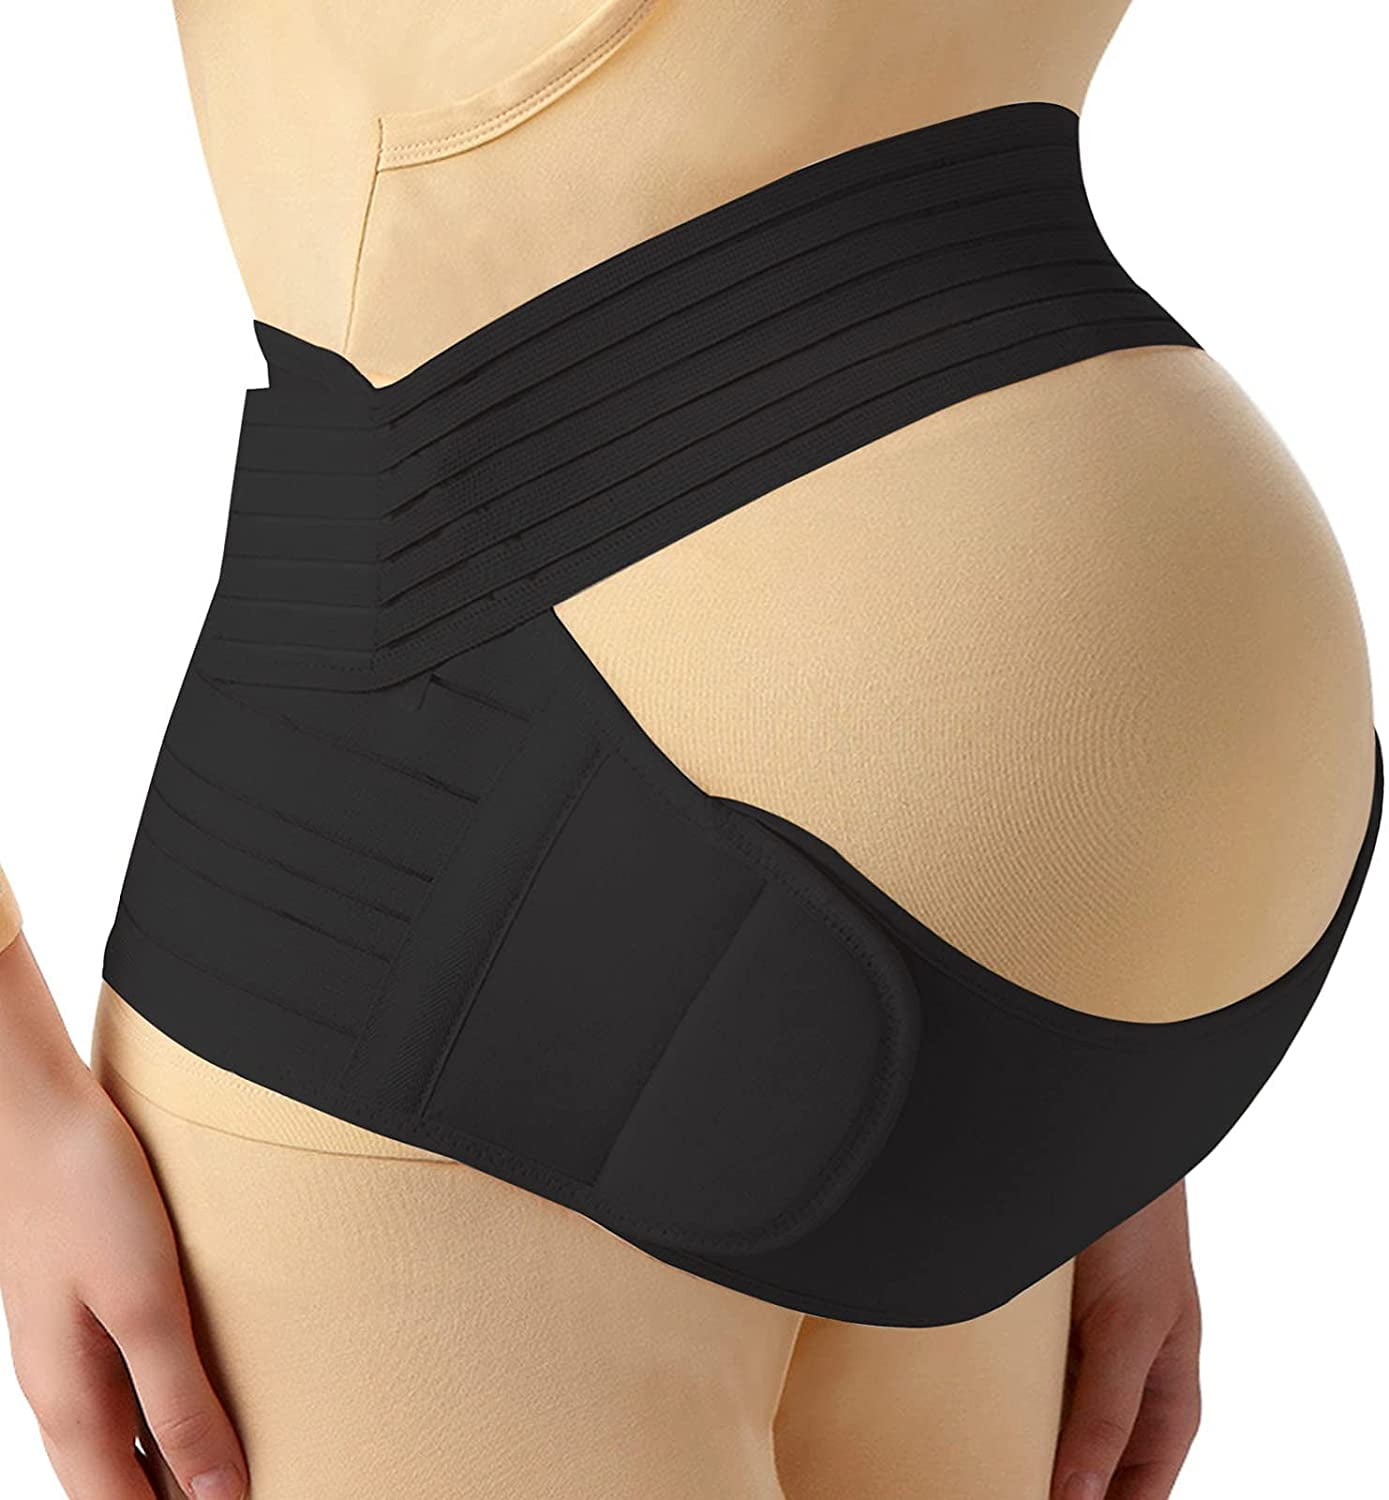 ﻿﻿FlexGuard Pregnancy Belly Support Band - Maternity Belt & Brace for  Pregnant Women, Bump Sling for Pelvic, Abdominal and Lower Back Pain Relief  with